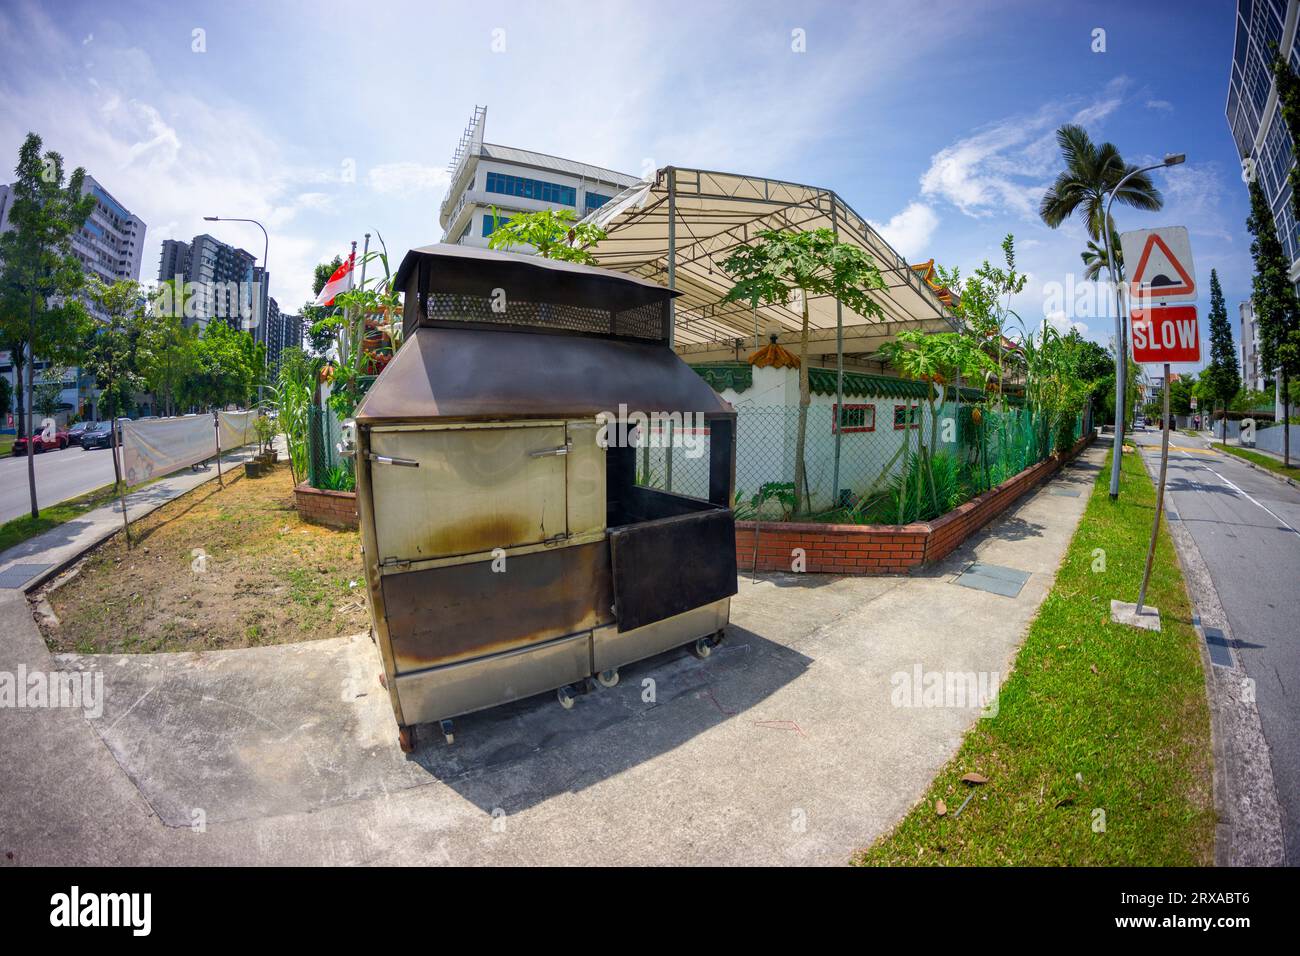 A rubbish burner for public use on footpath in Geylang district, Singapore Stock Photo